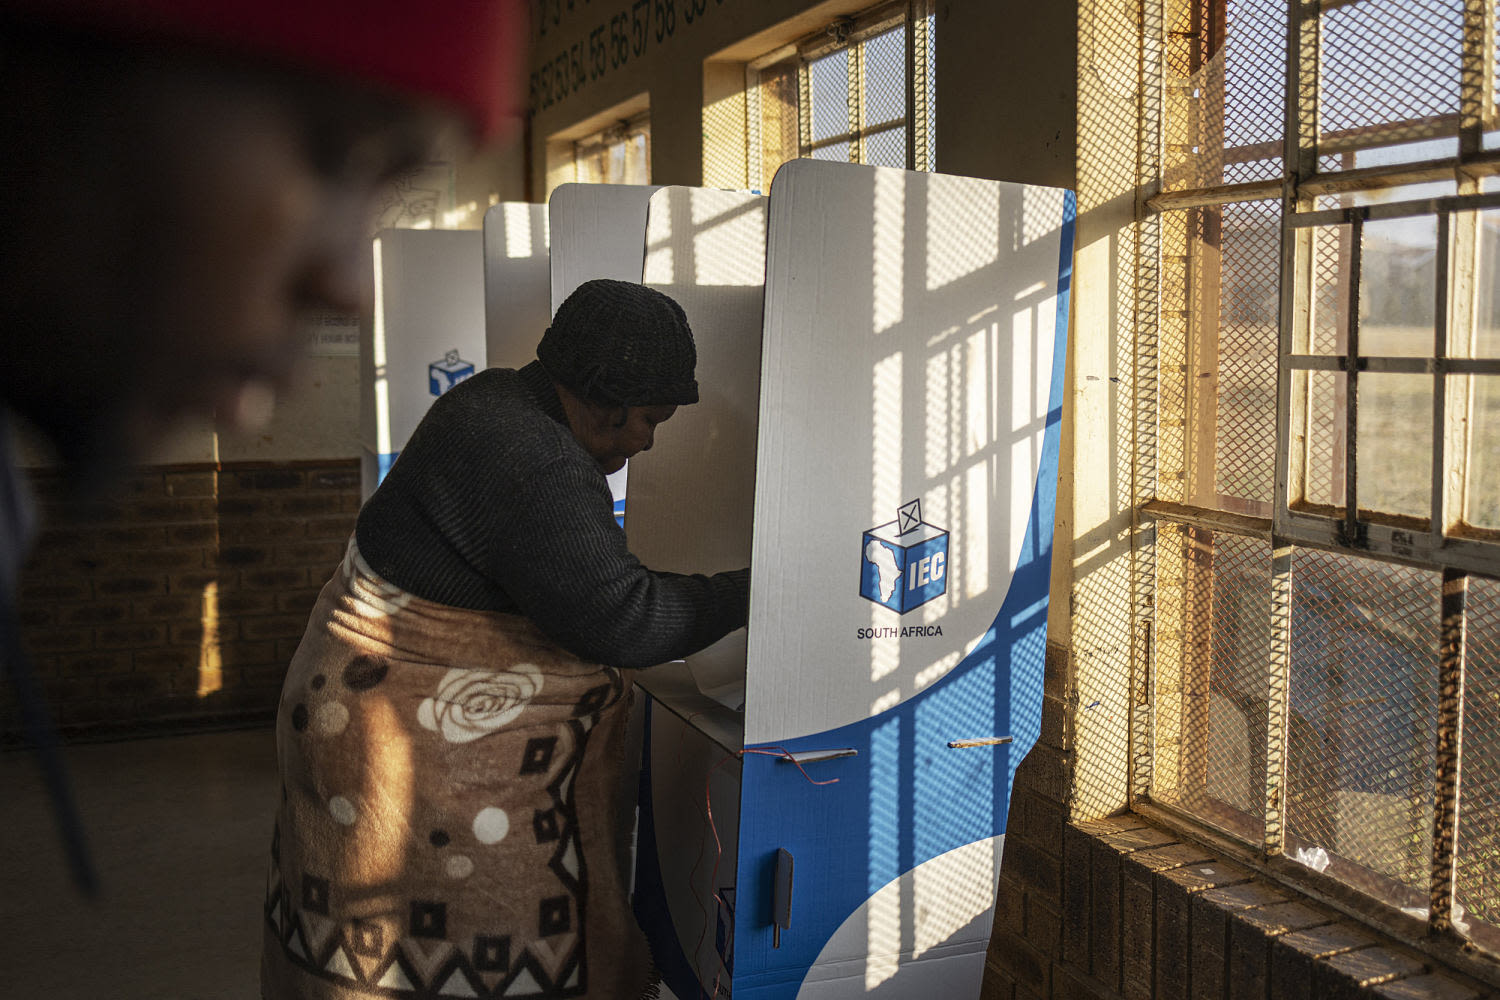 The 30-year dominance of Nelson Mandela's party looks set to end in today's South Africa vote